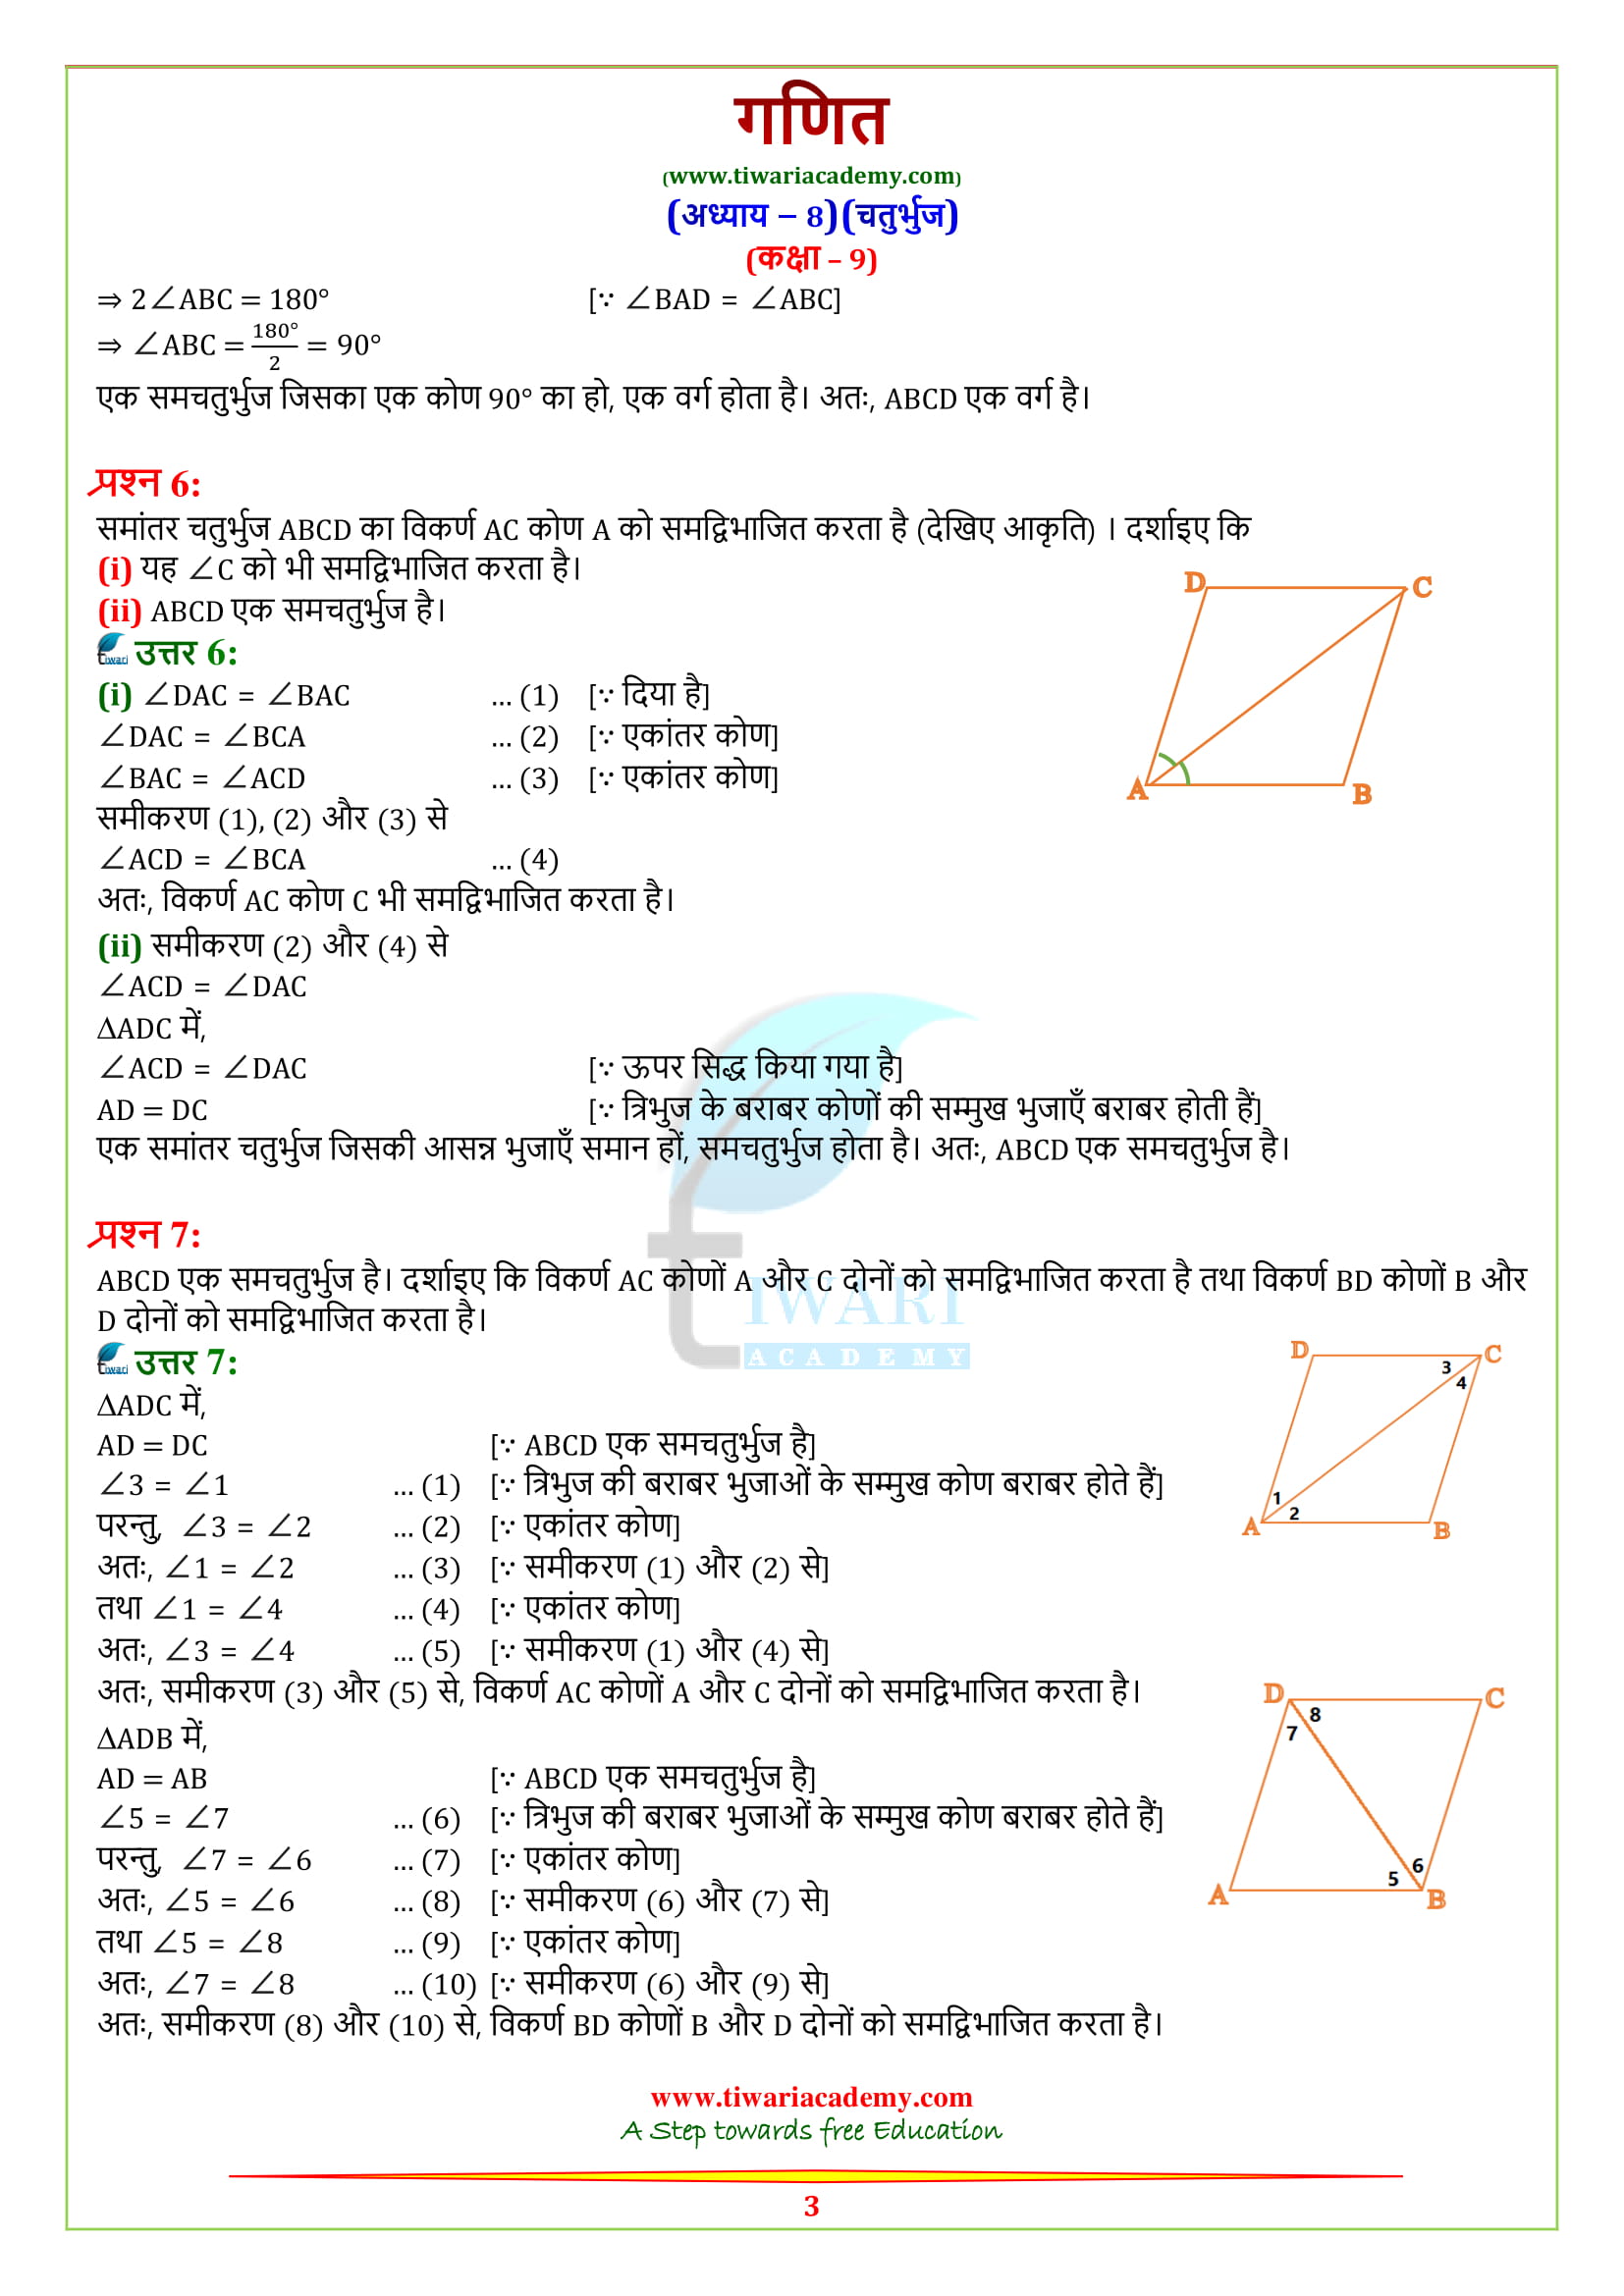 9 Maths Exercise 8.1 Solutions question 1, 2, 3, 4, 5, 6, 7, 8.